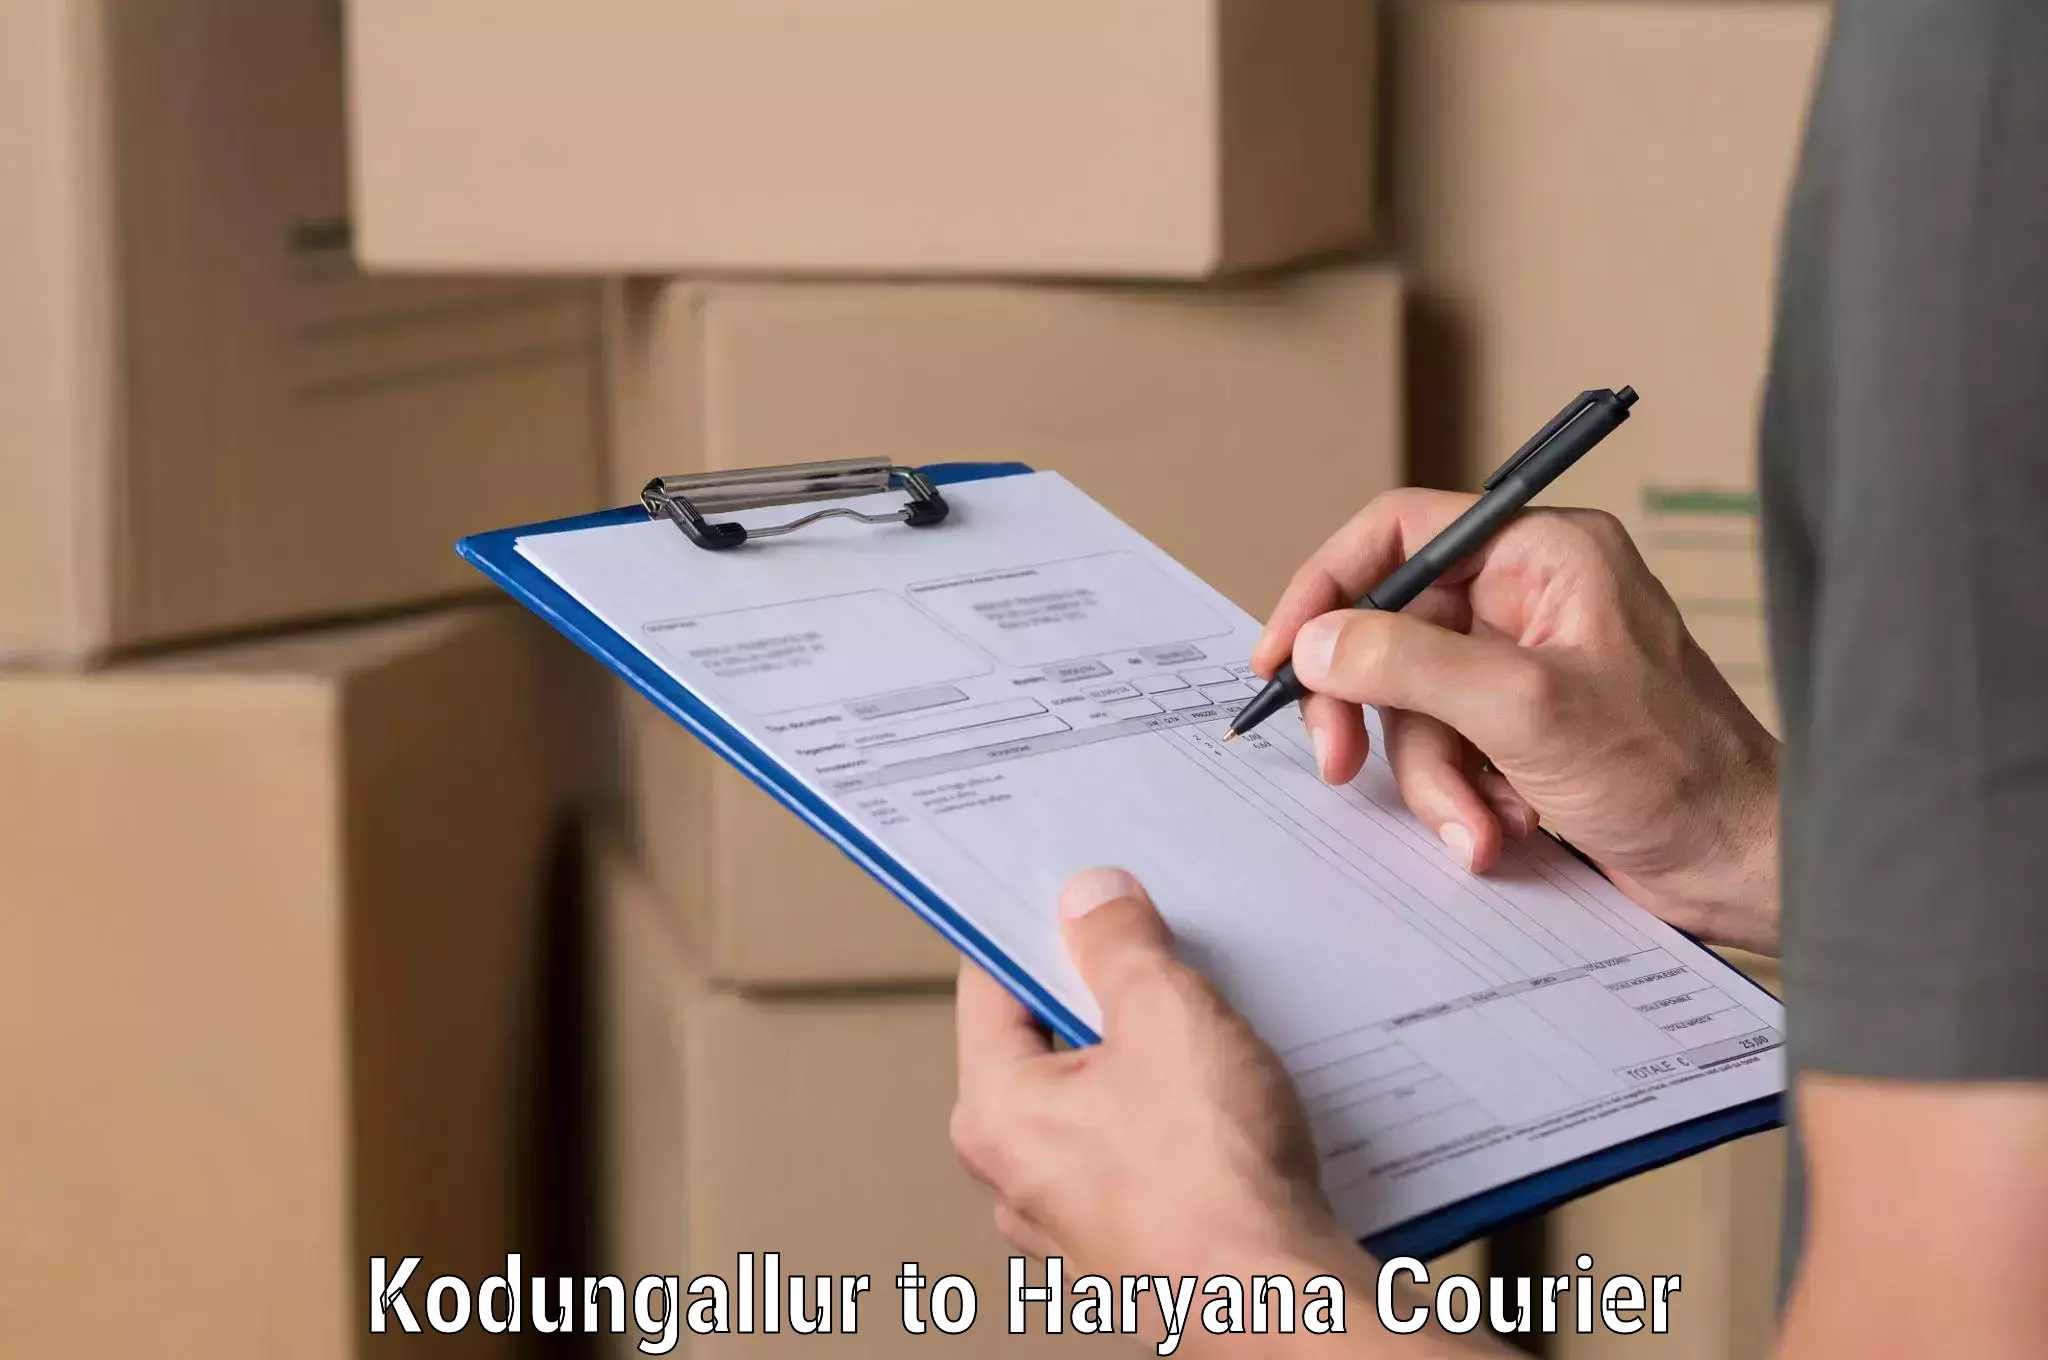 Urgent courier needs Kodungallur to Chaudhary Charan Singh Haryana Agricultural University Hisar